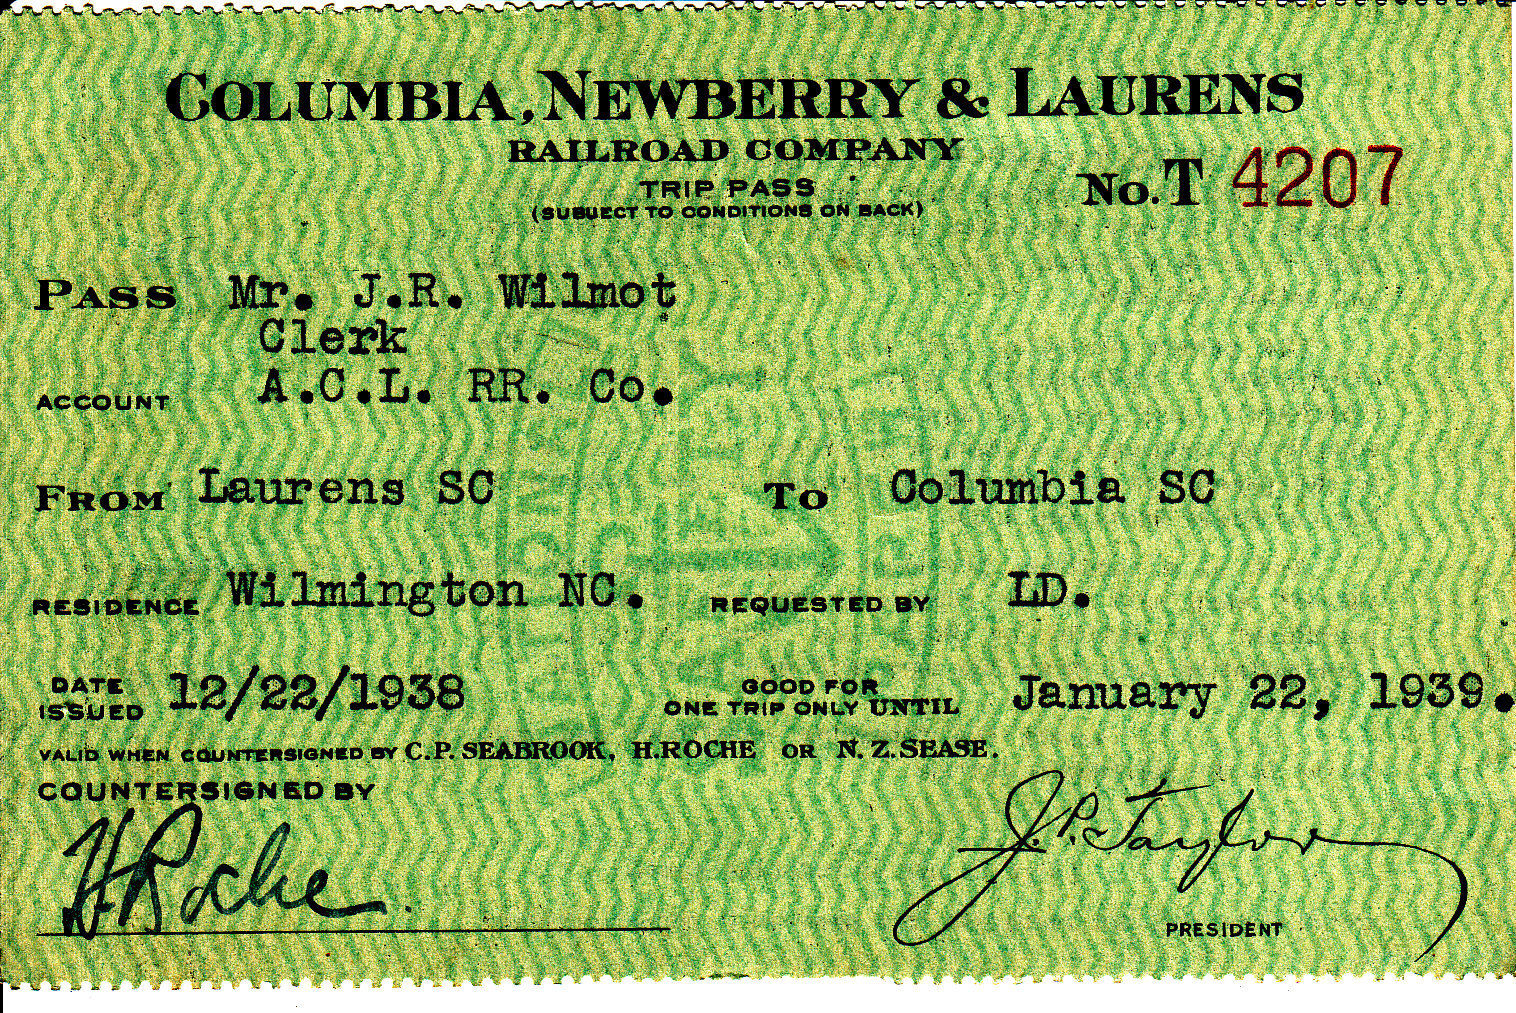 Courtesy of photographer - researcher Ann L. Helms, 2018 / 1939 Ticket